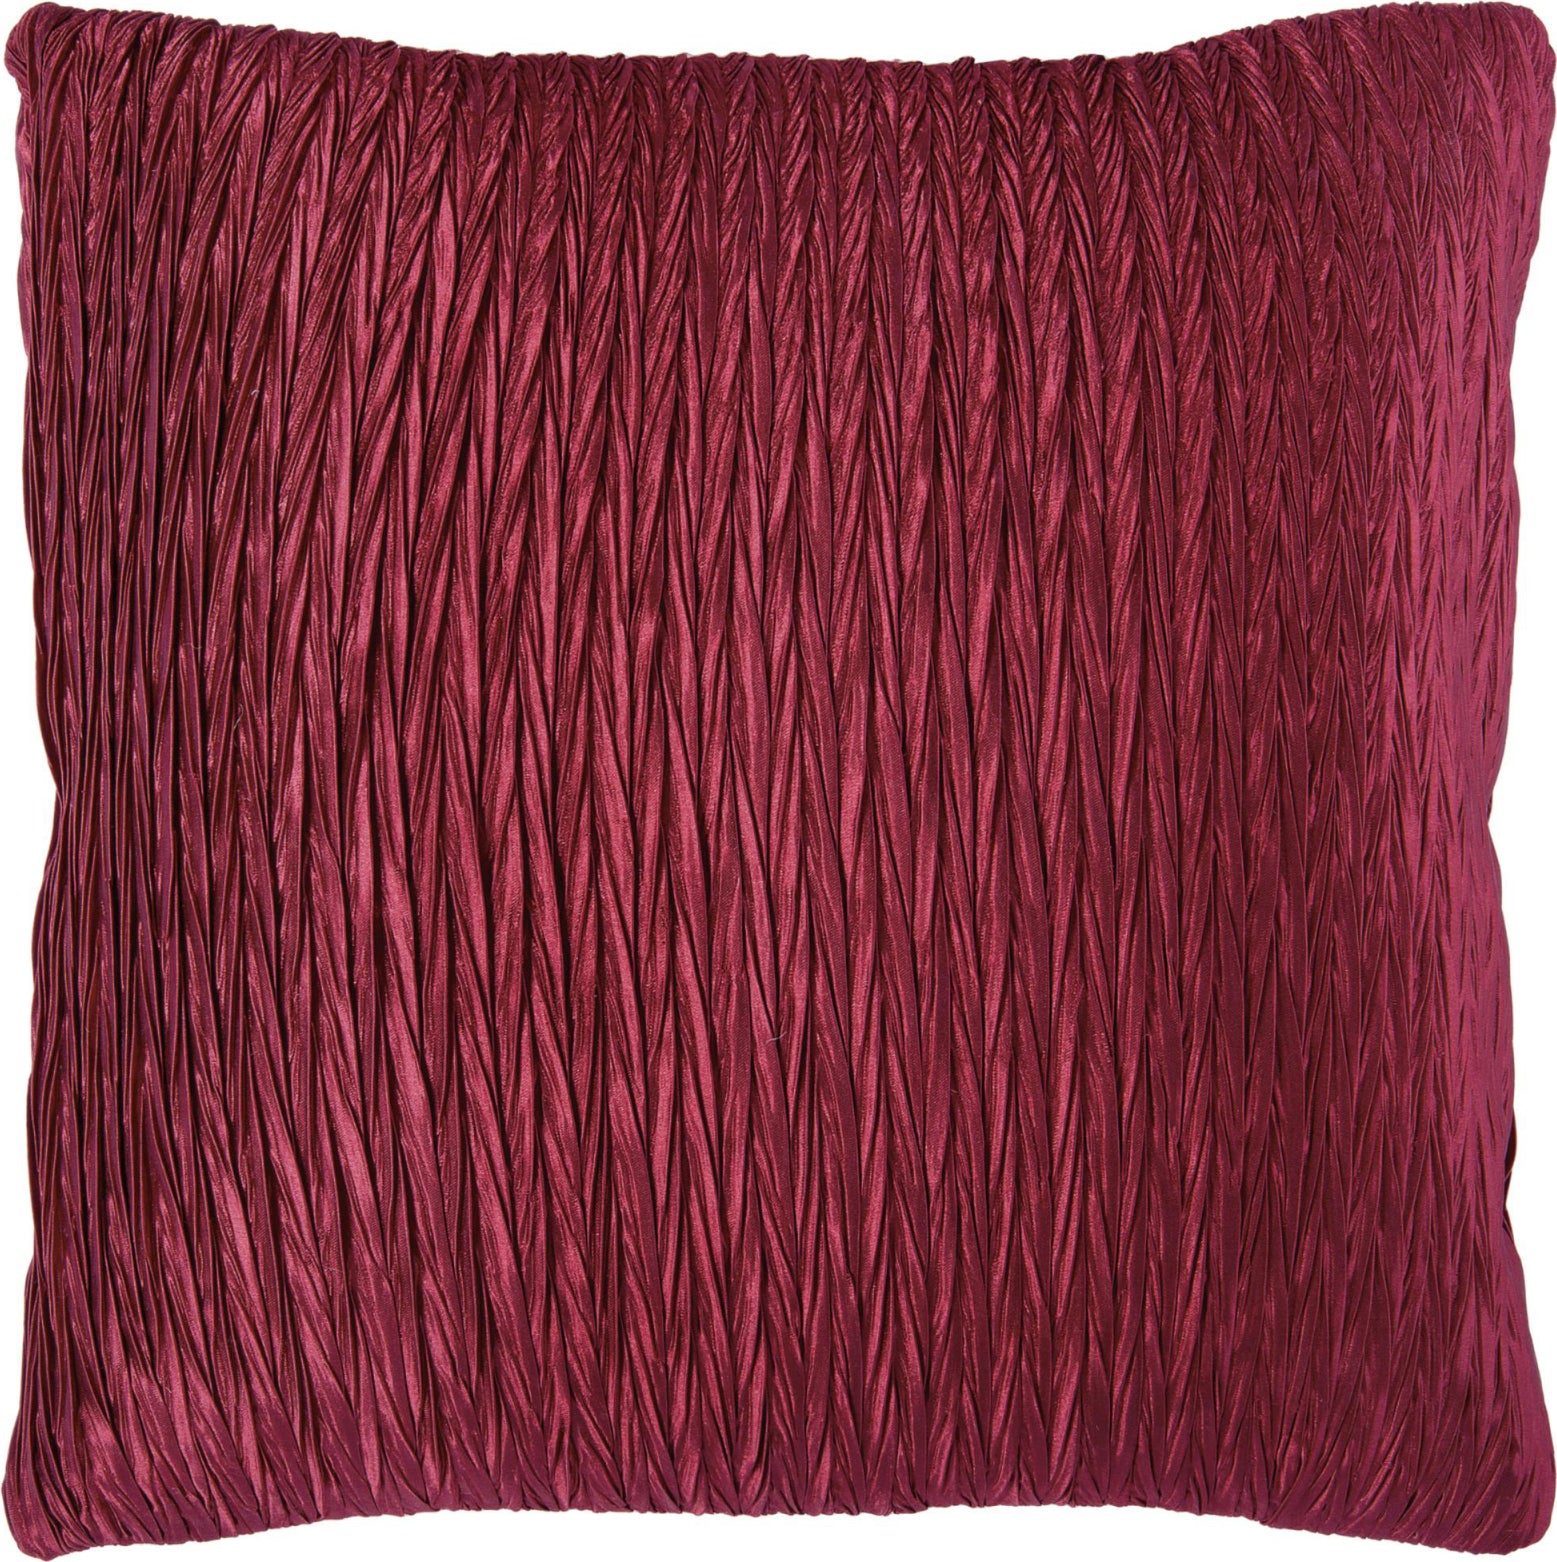 Rizzy Pillows T06815 Maroon